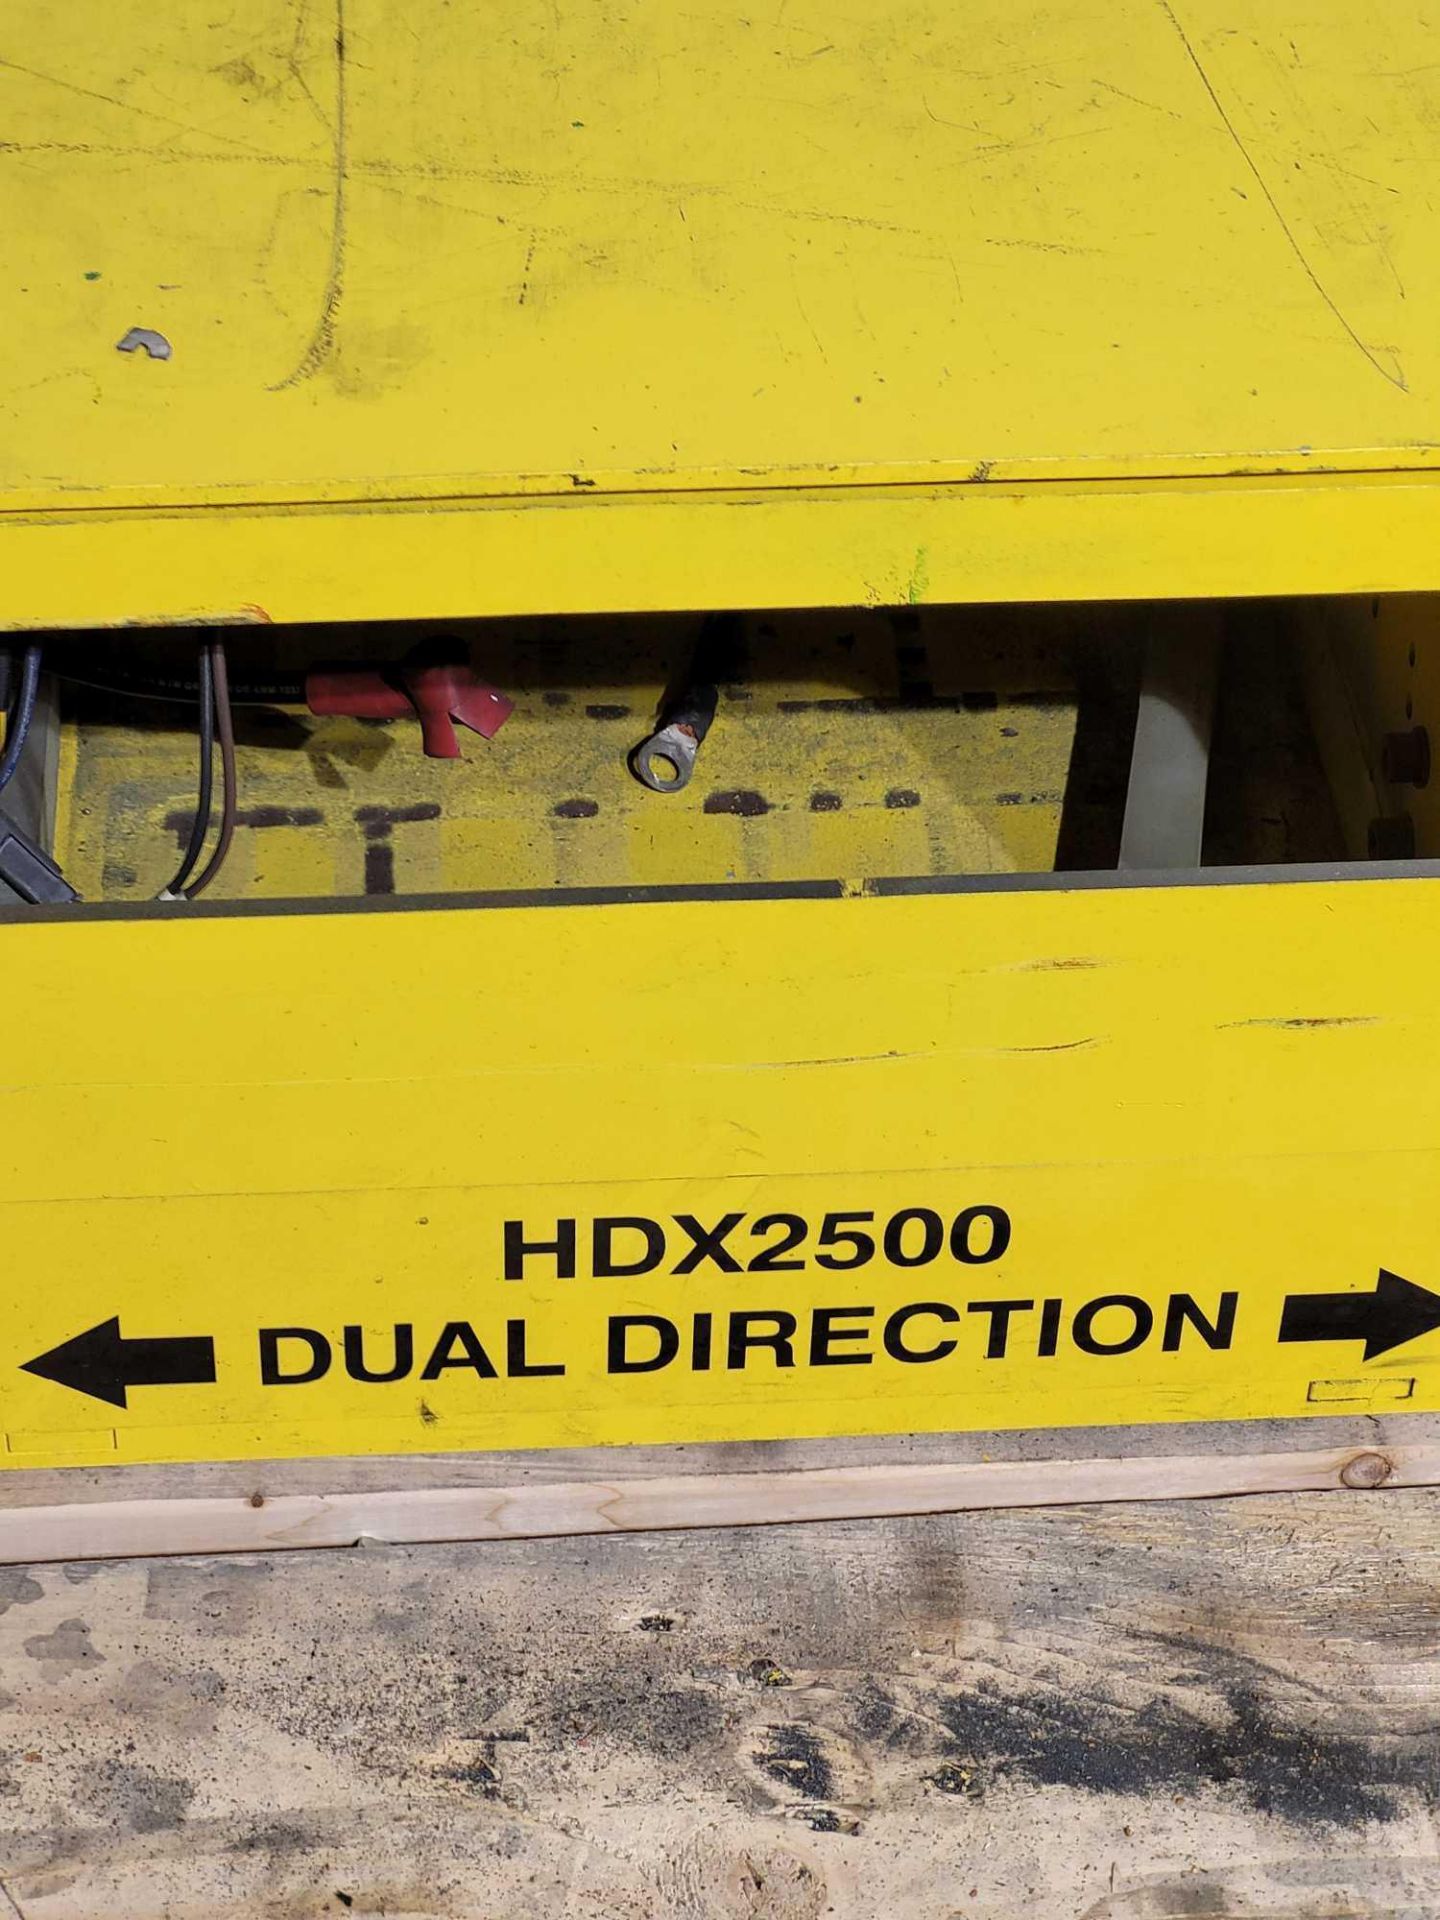 MOR-TECH DESIGN HDX2500 / Dual Direction Automated Guided Vehicle  /  Oversized pallet for this lot - Image 8 of 14